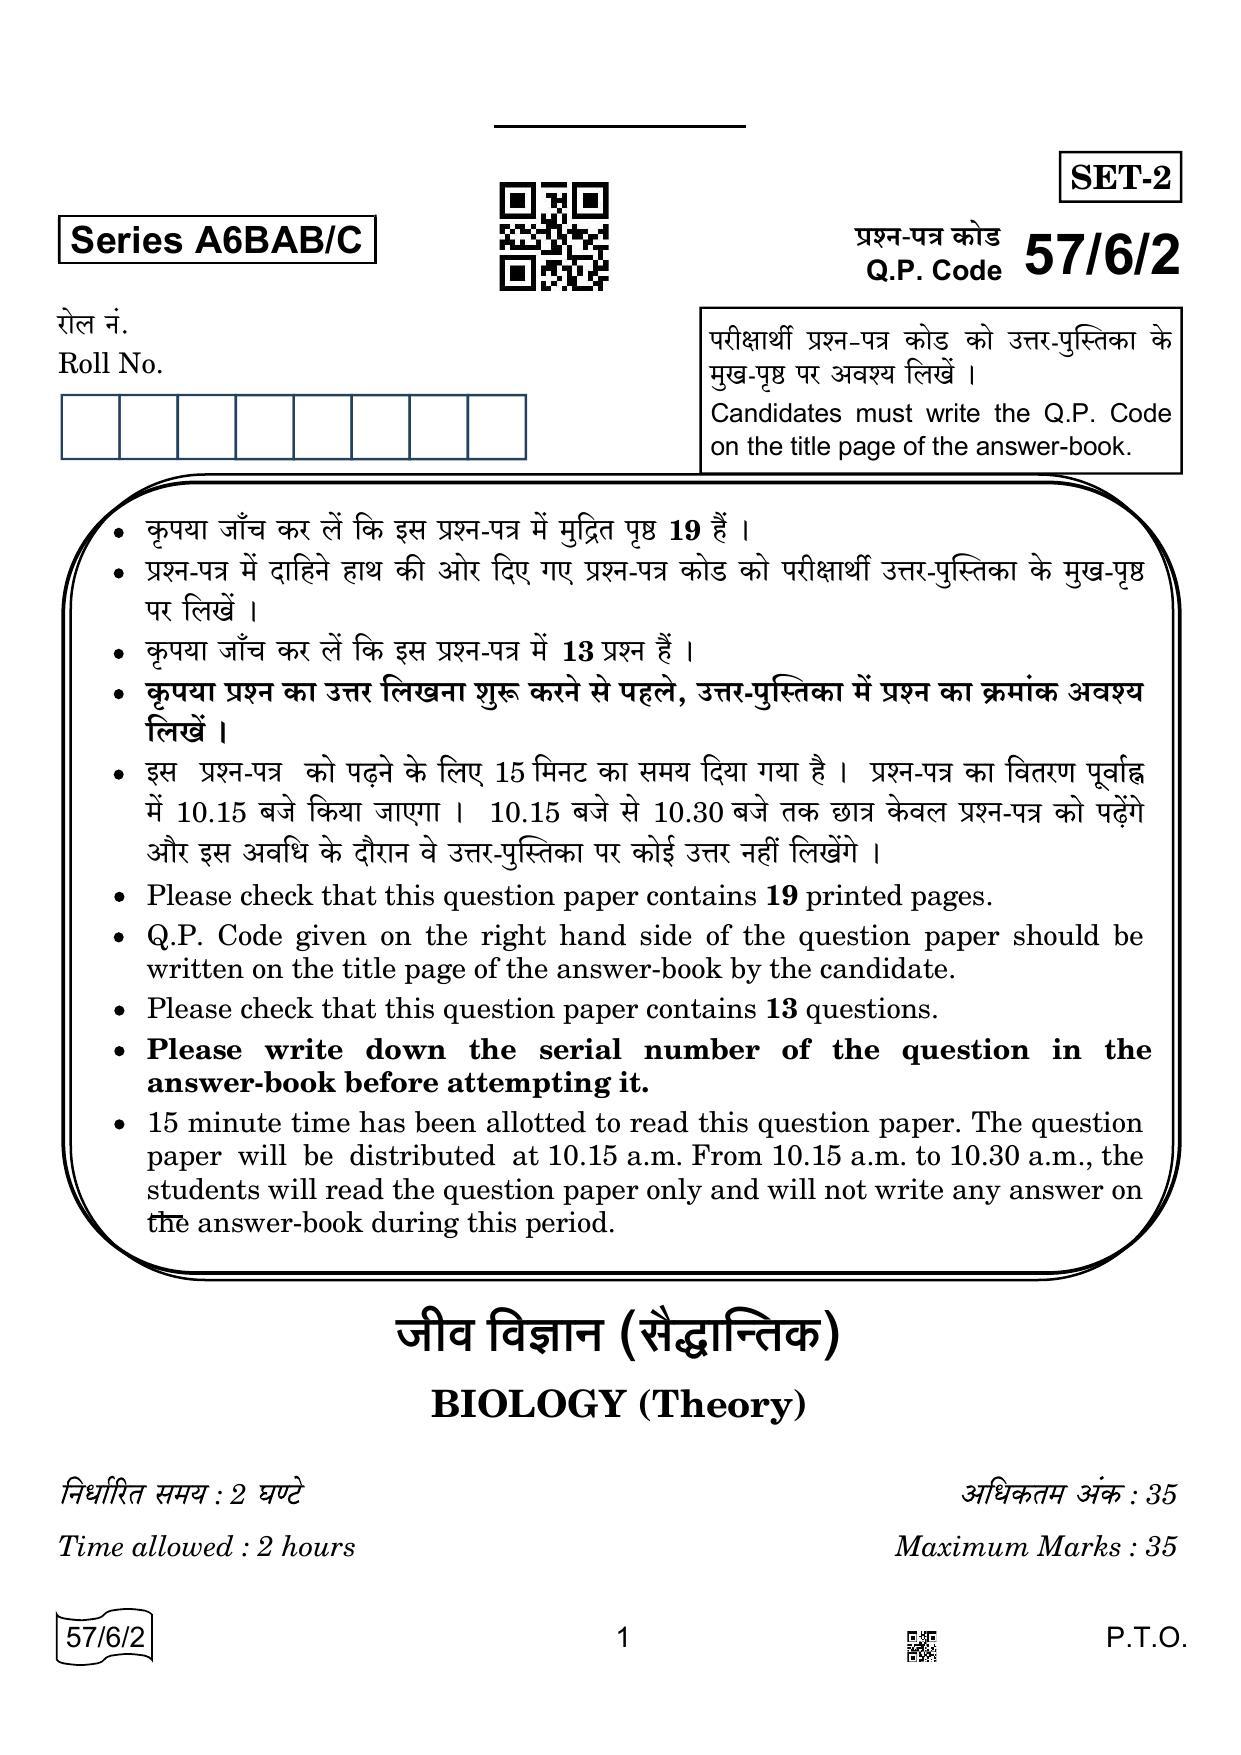 CBSE Class 12 57-6-2 BIOLOGY 2022 Compartment Question Paper - Page 1